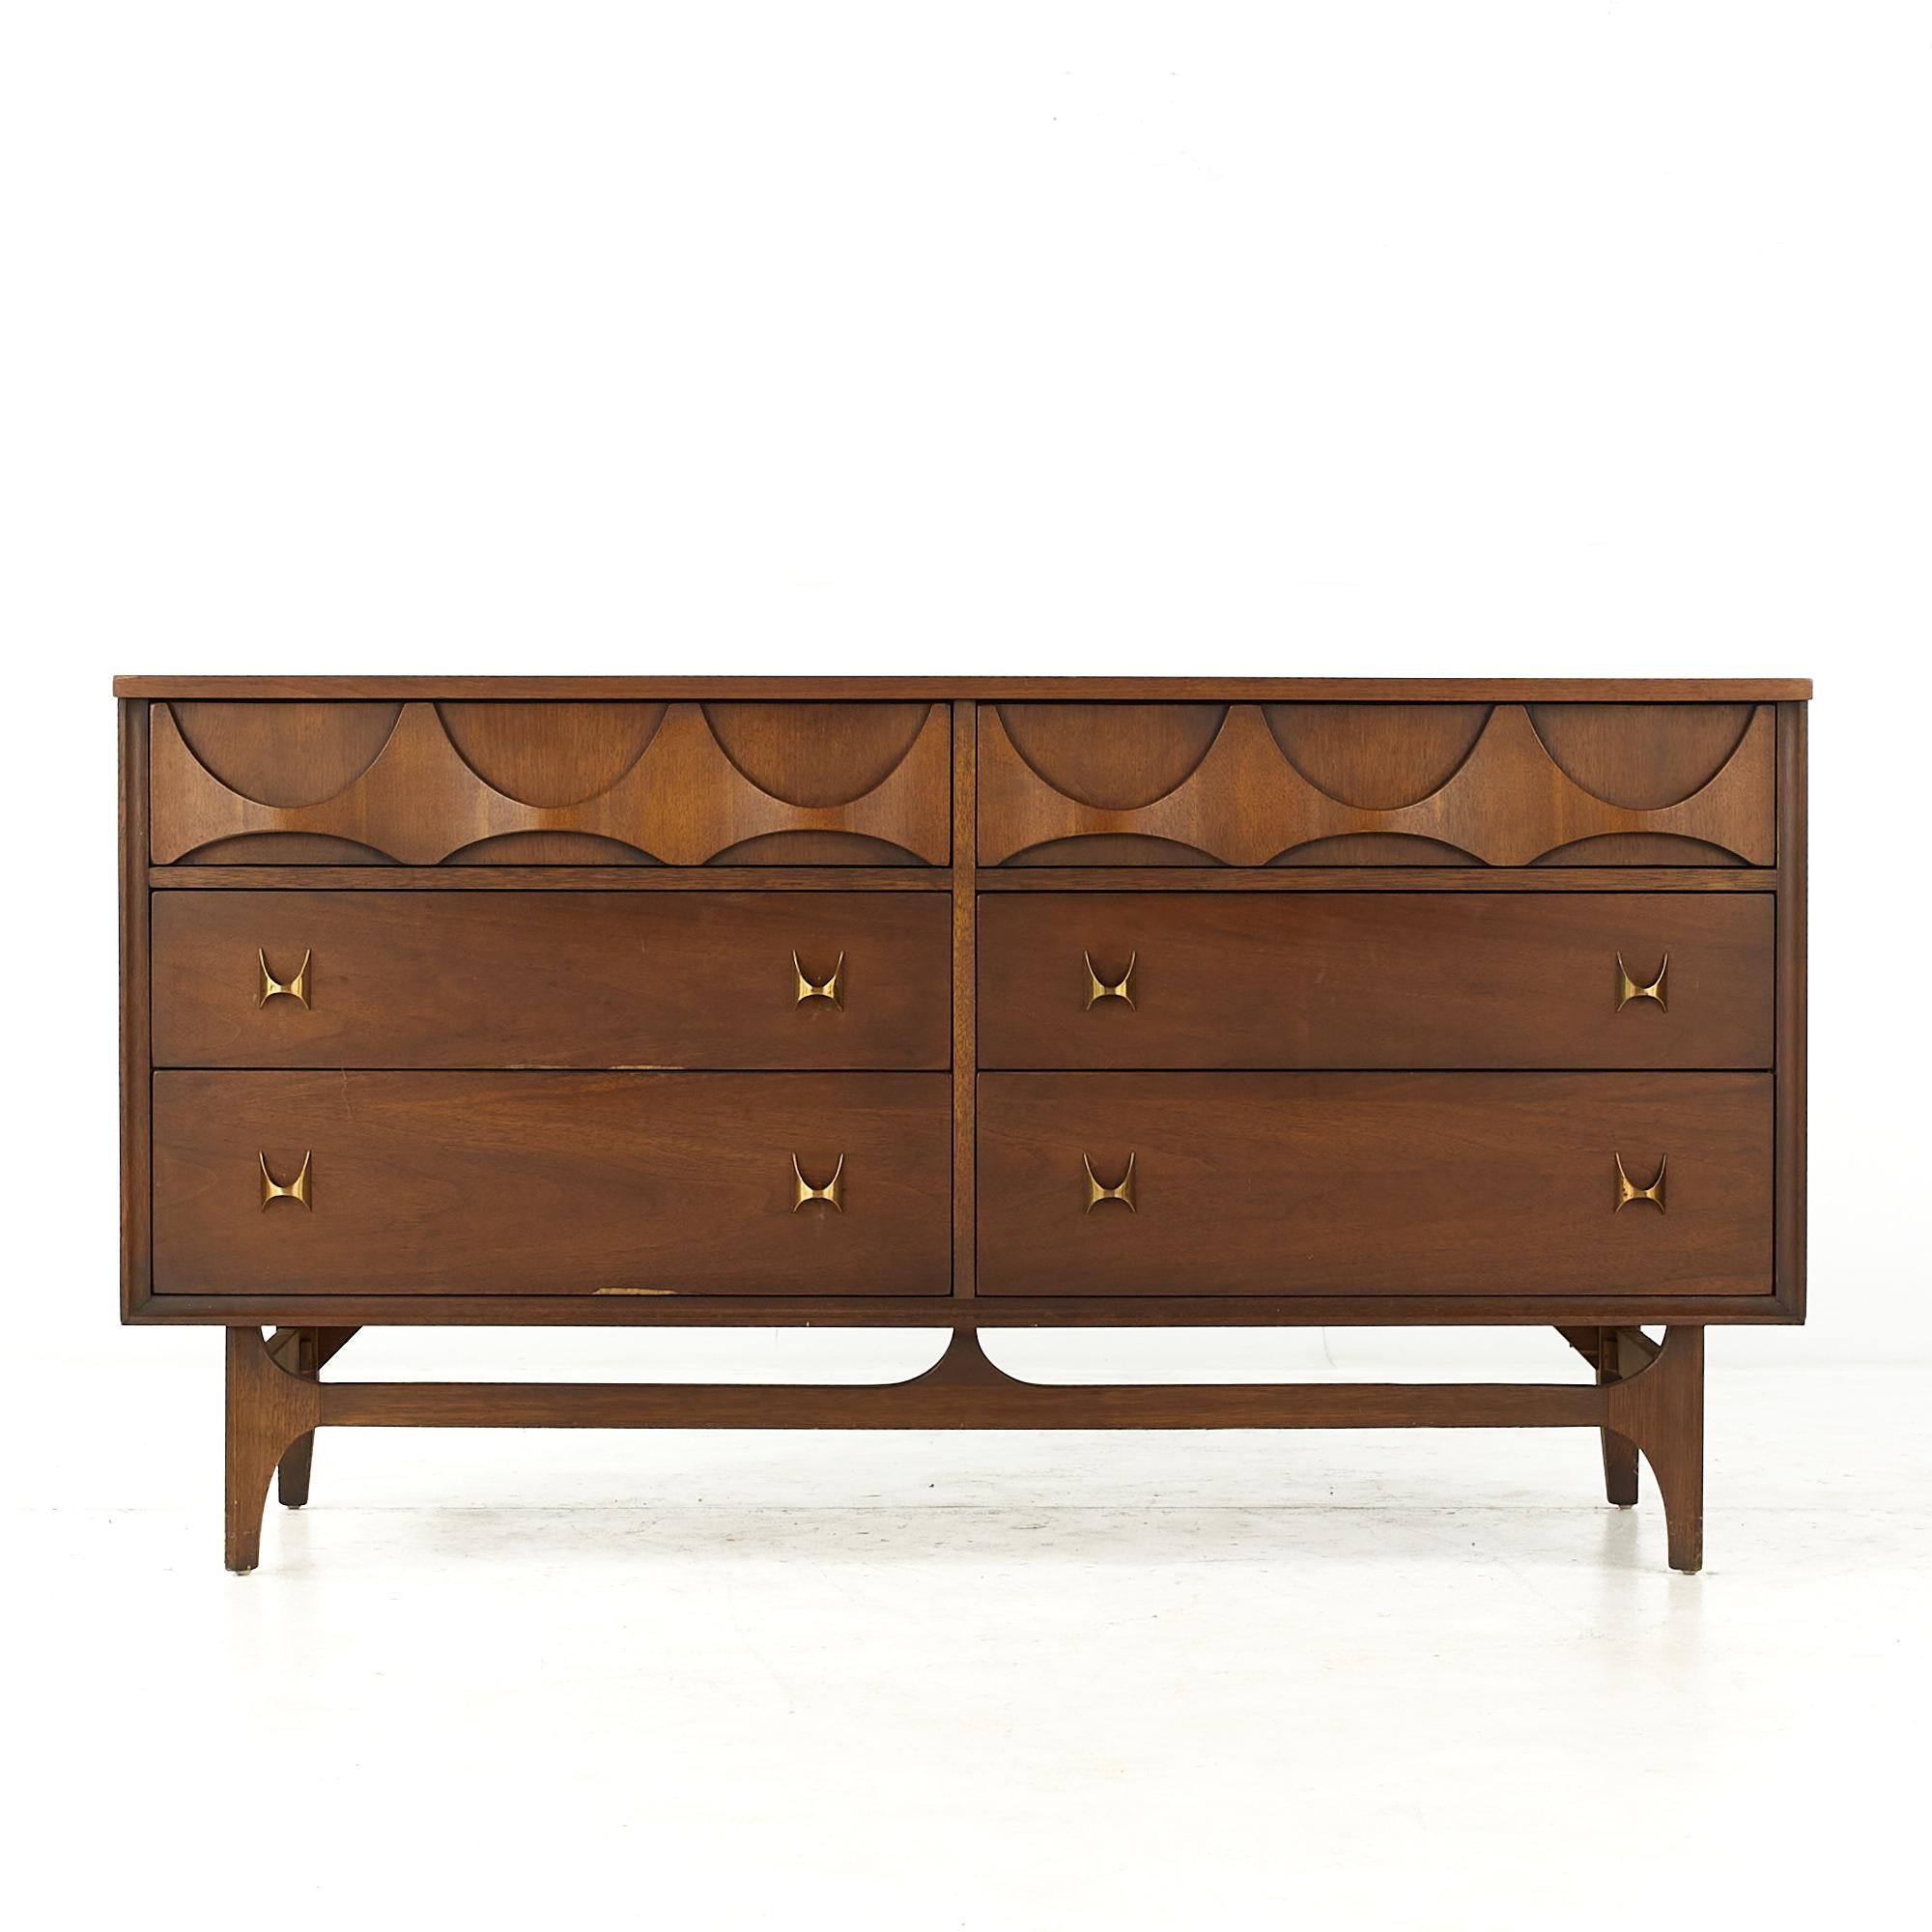 Broyhill Brasilia Mid Century walnut 6 drawer lowboy dresser

This lowboy measures: 58 wide x 19 deep x 31 inches high

All pieces of furniture can be had in what we call restored vintage condition. That means the piece is restored upon purchase